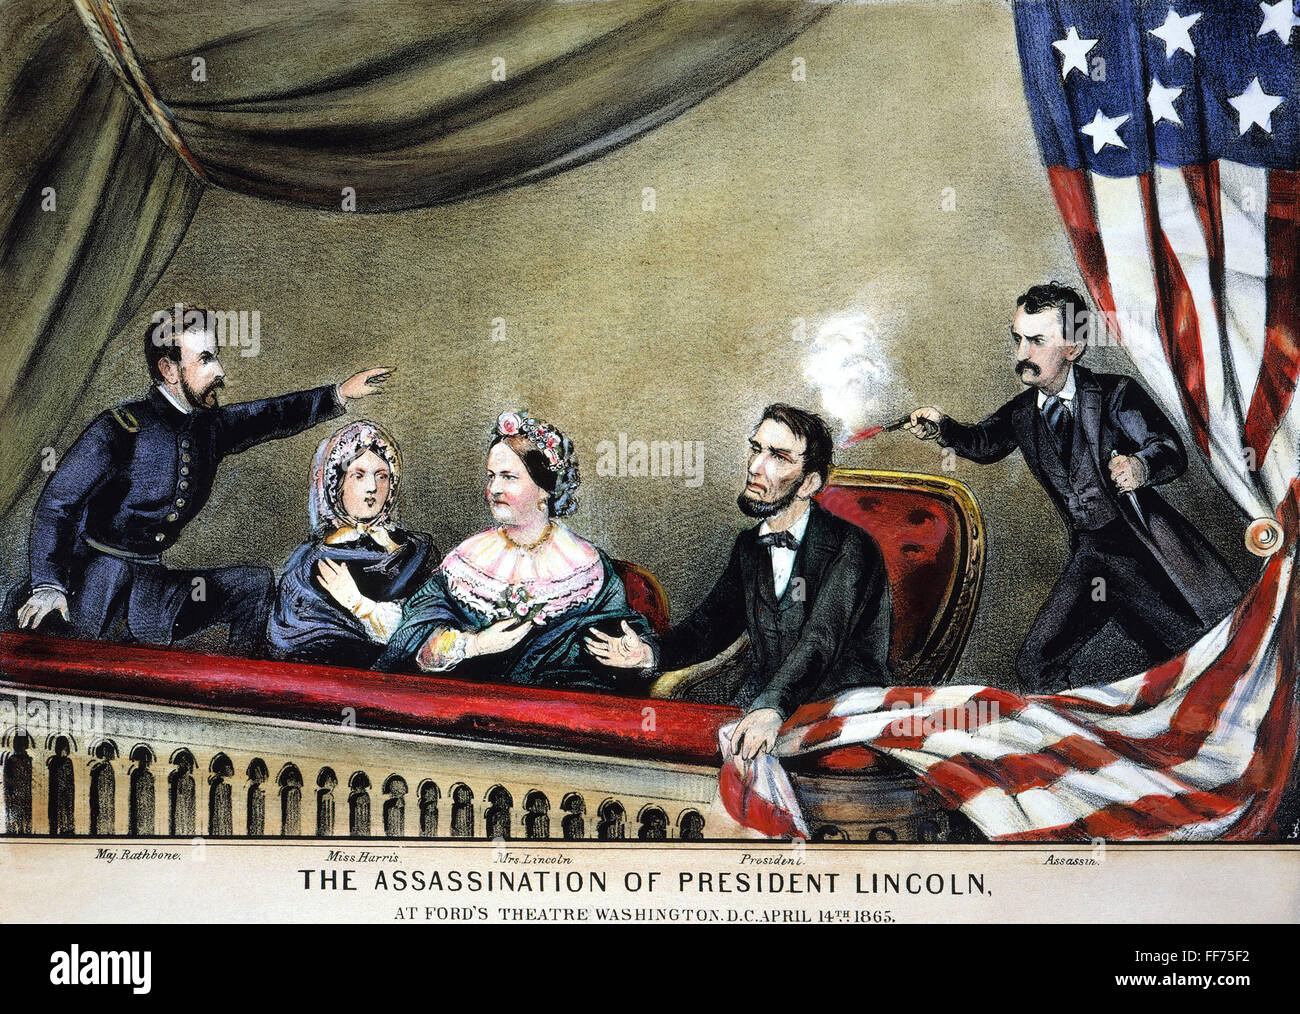 LINCOLN ASSASSINATION. /nThe assassination of President Abraham Lincoln by John Wilkes Booth at Ford's Theatre, Washington, D.C., 14 April 1865. Lithograph, 1865, by Currier & Ives. Stock Photo